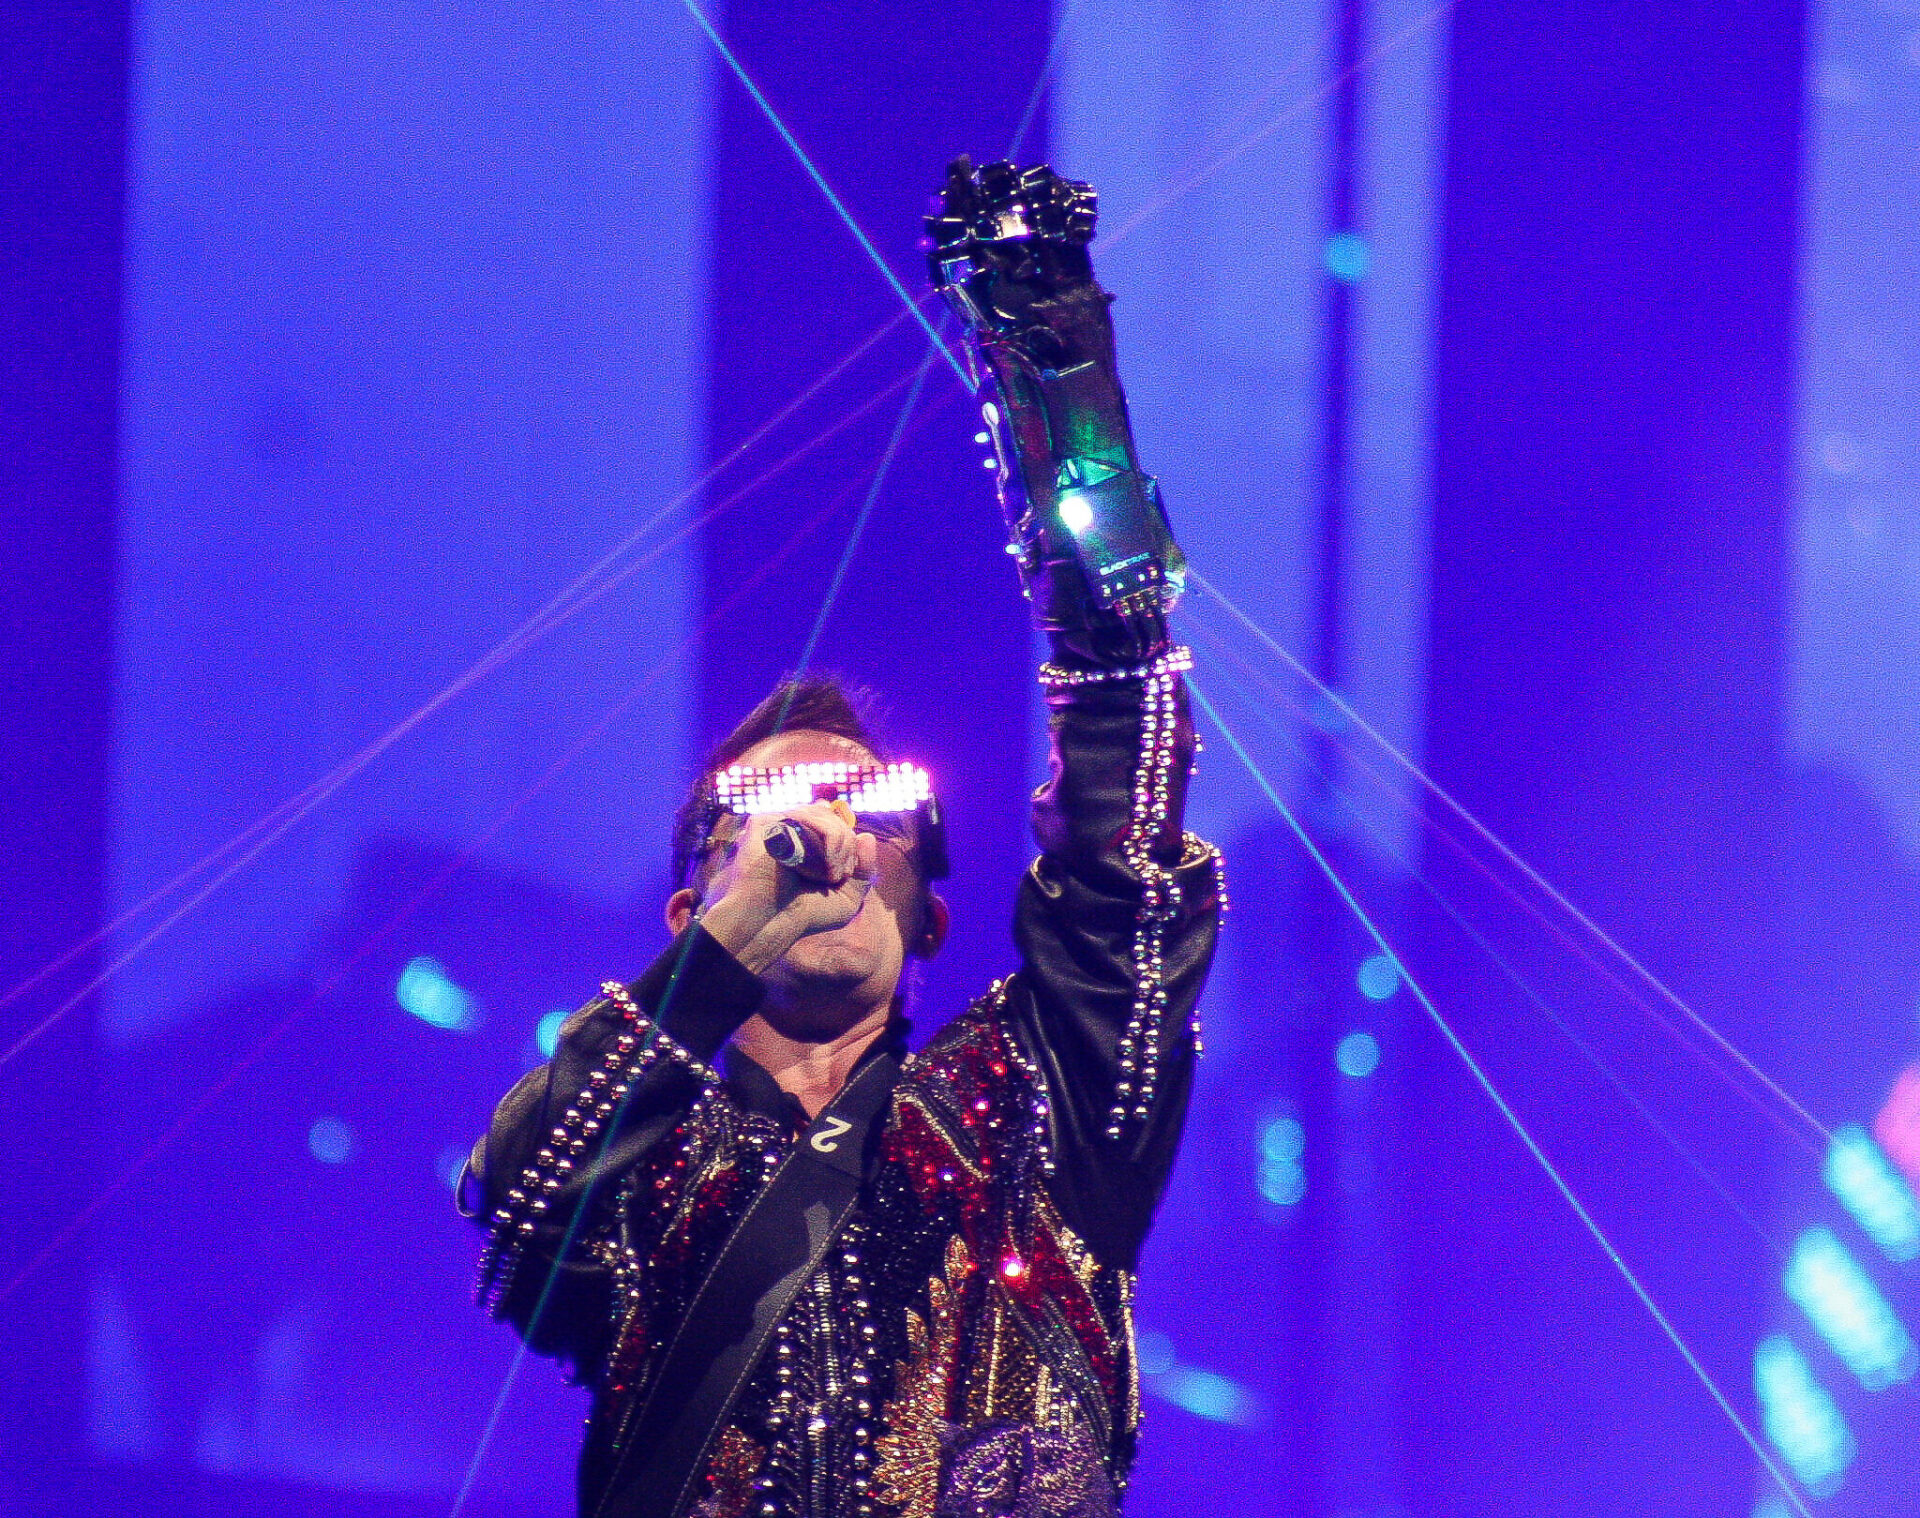 LIVE REVIEW: Muse continue to stun with “Simulation Theory World Tour”